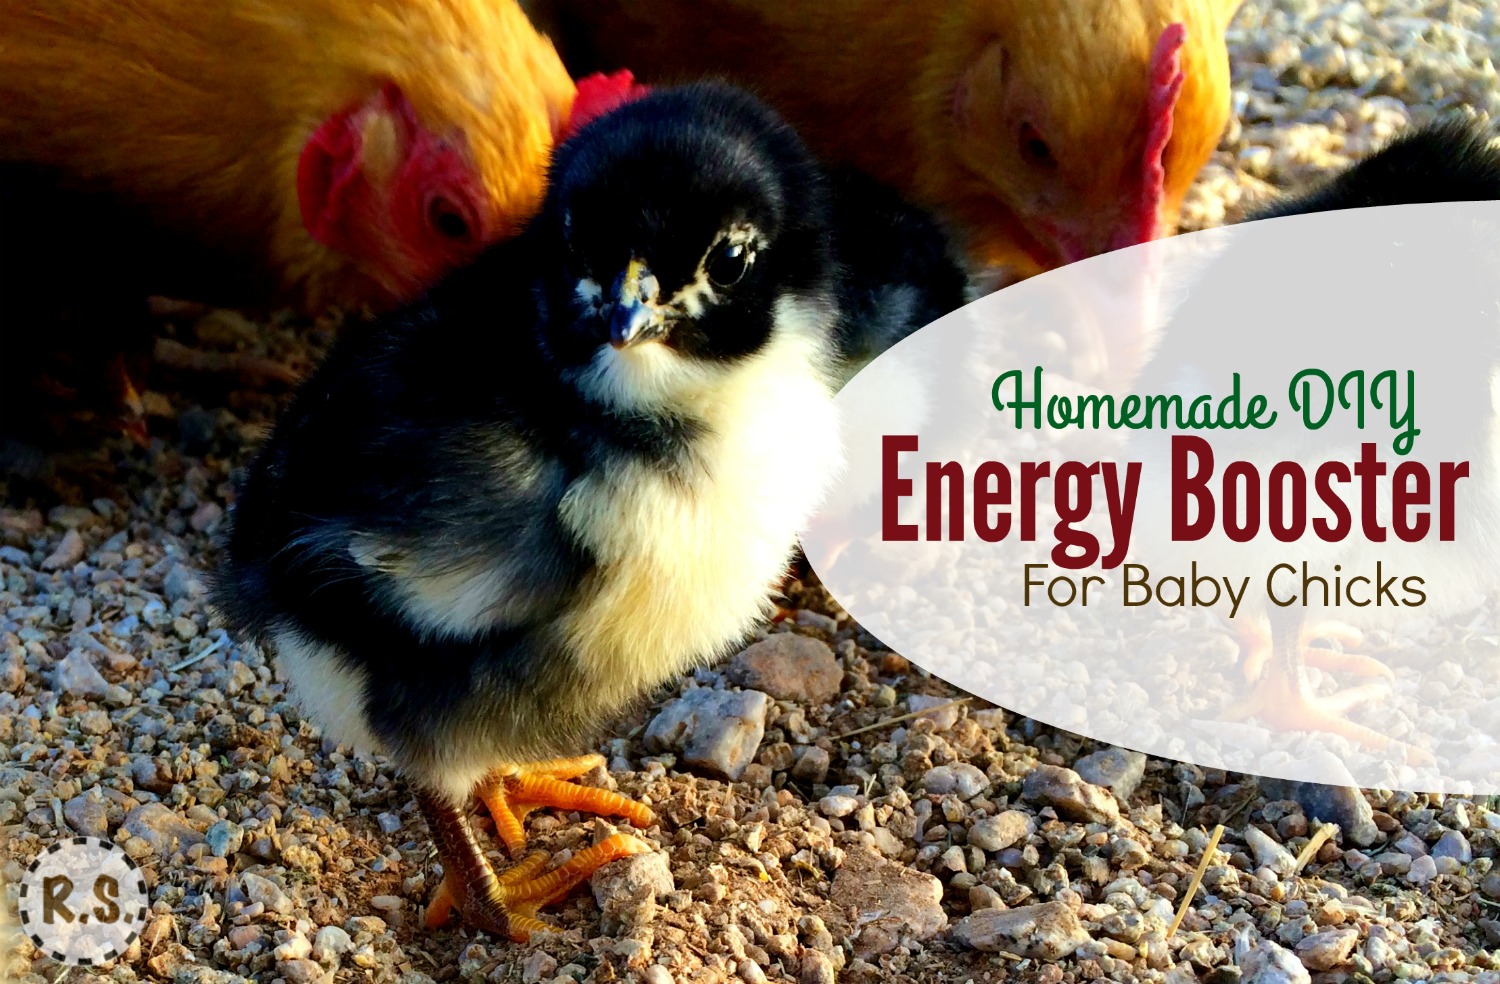 Raising baby chicks? Here’s a DIY energy booster or electrolyte recipe you can put in their water. Great for their health & easy for beginners. Important to getting your chicks off to a great start!